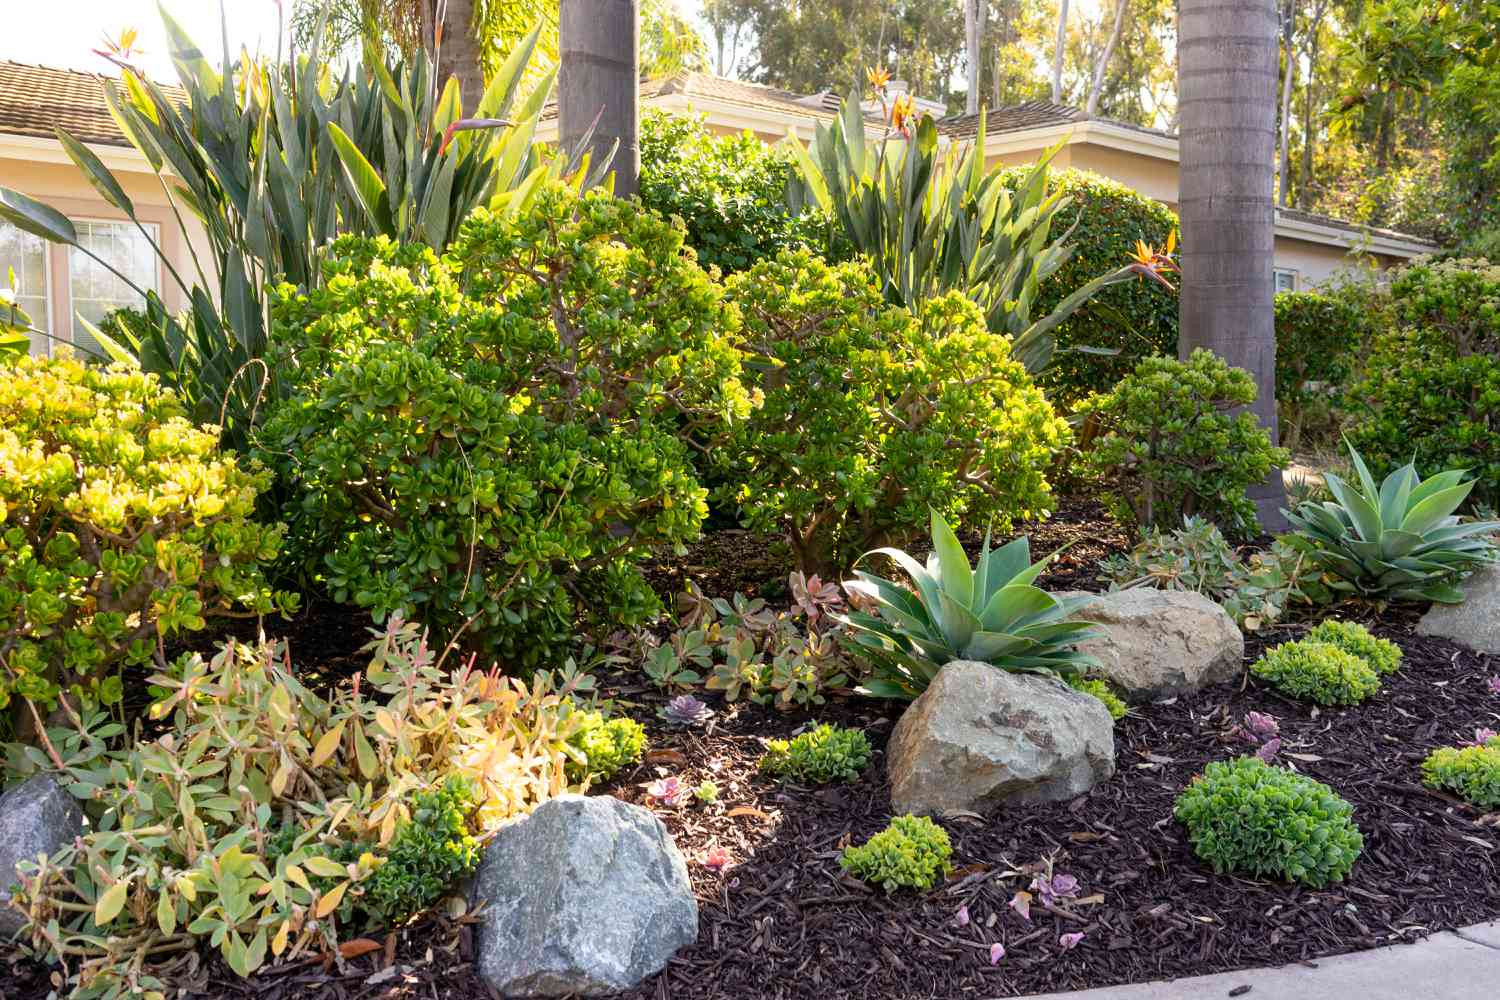 Landscaping on a Budget:  Easy Money-Saving Ideas